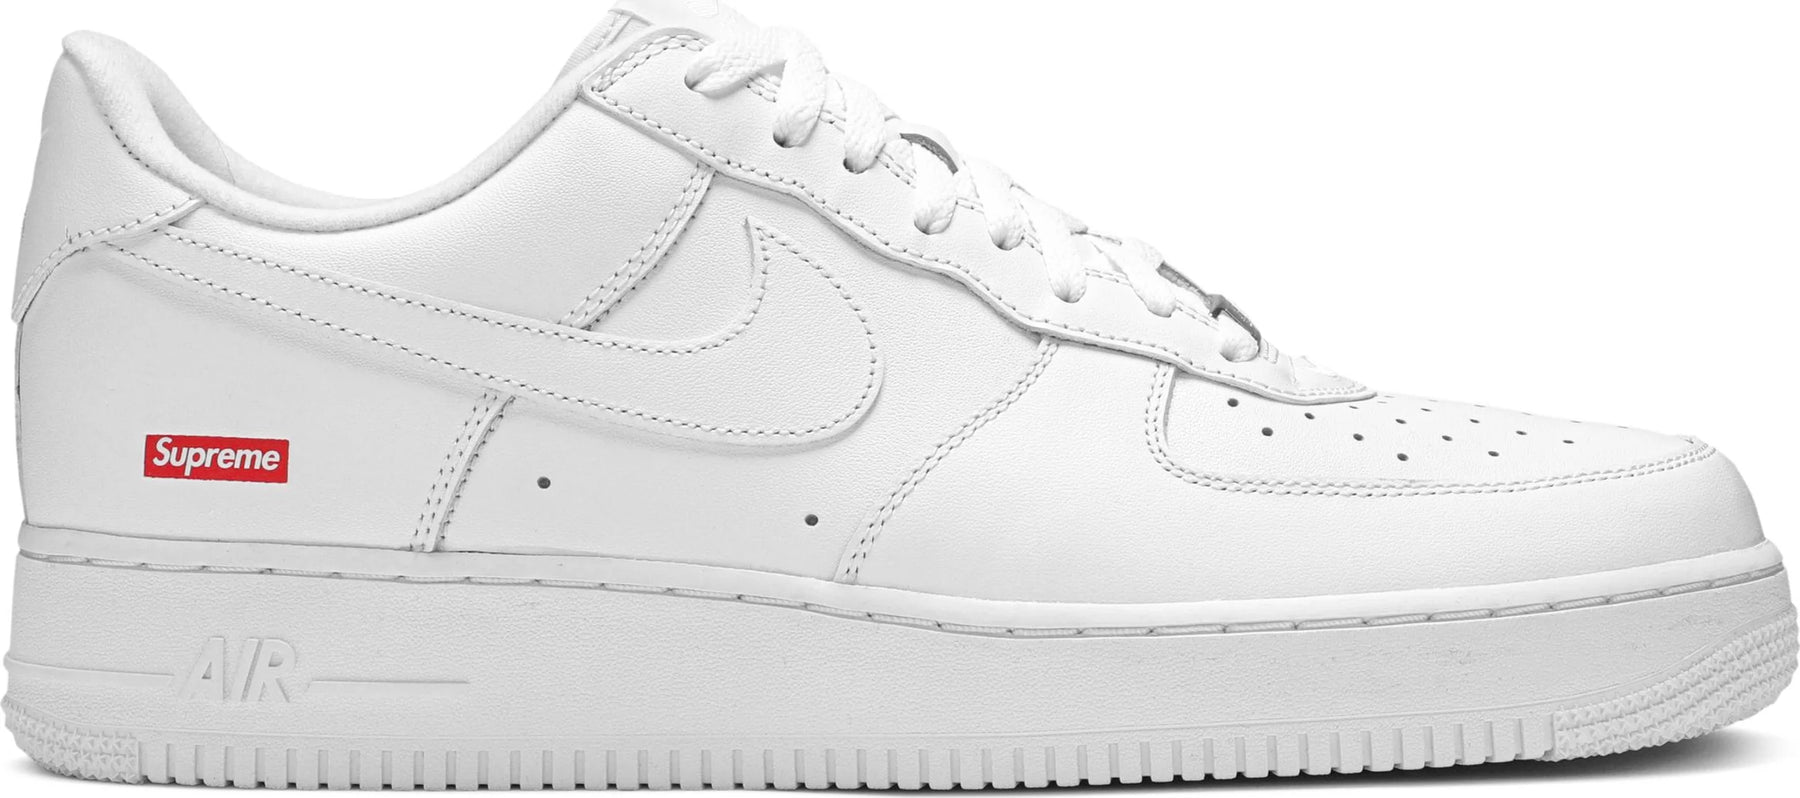 Nike Air Force 1 Low 'Supreme White' (Preowned)